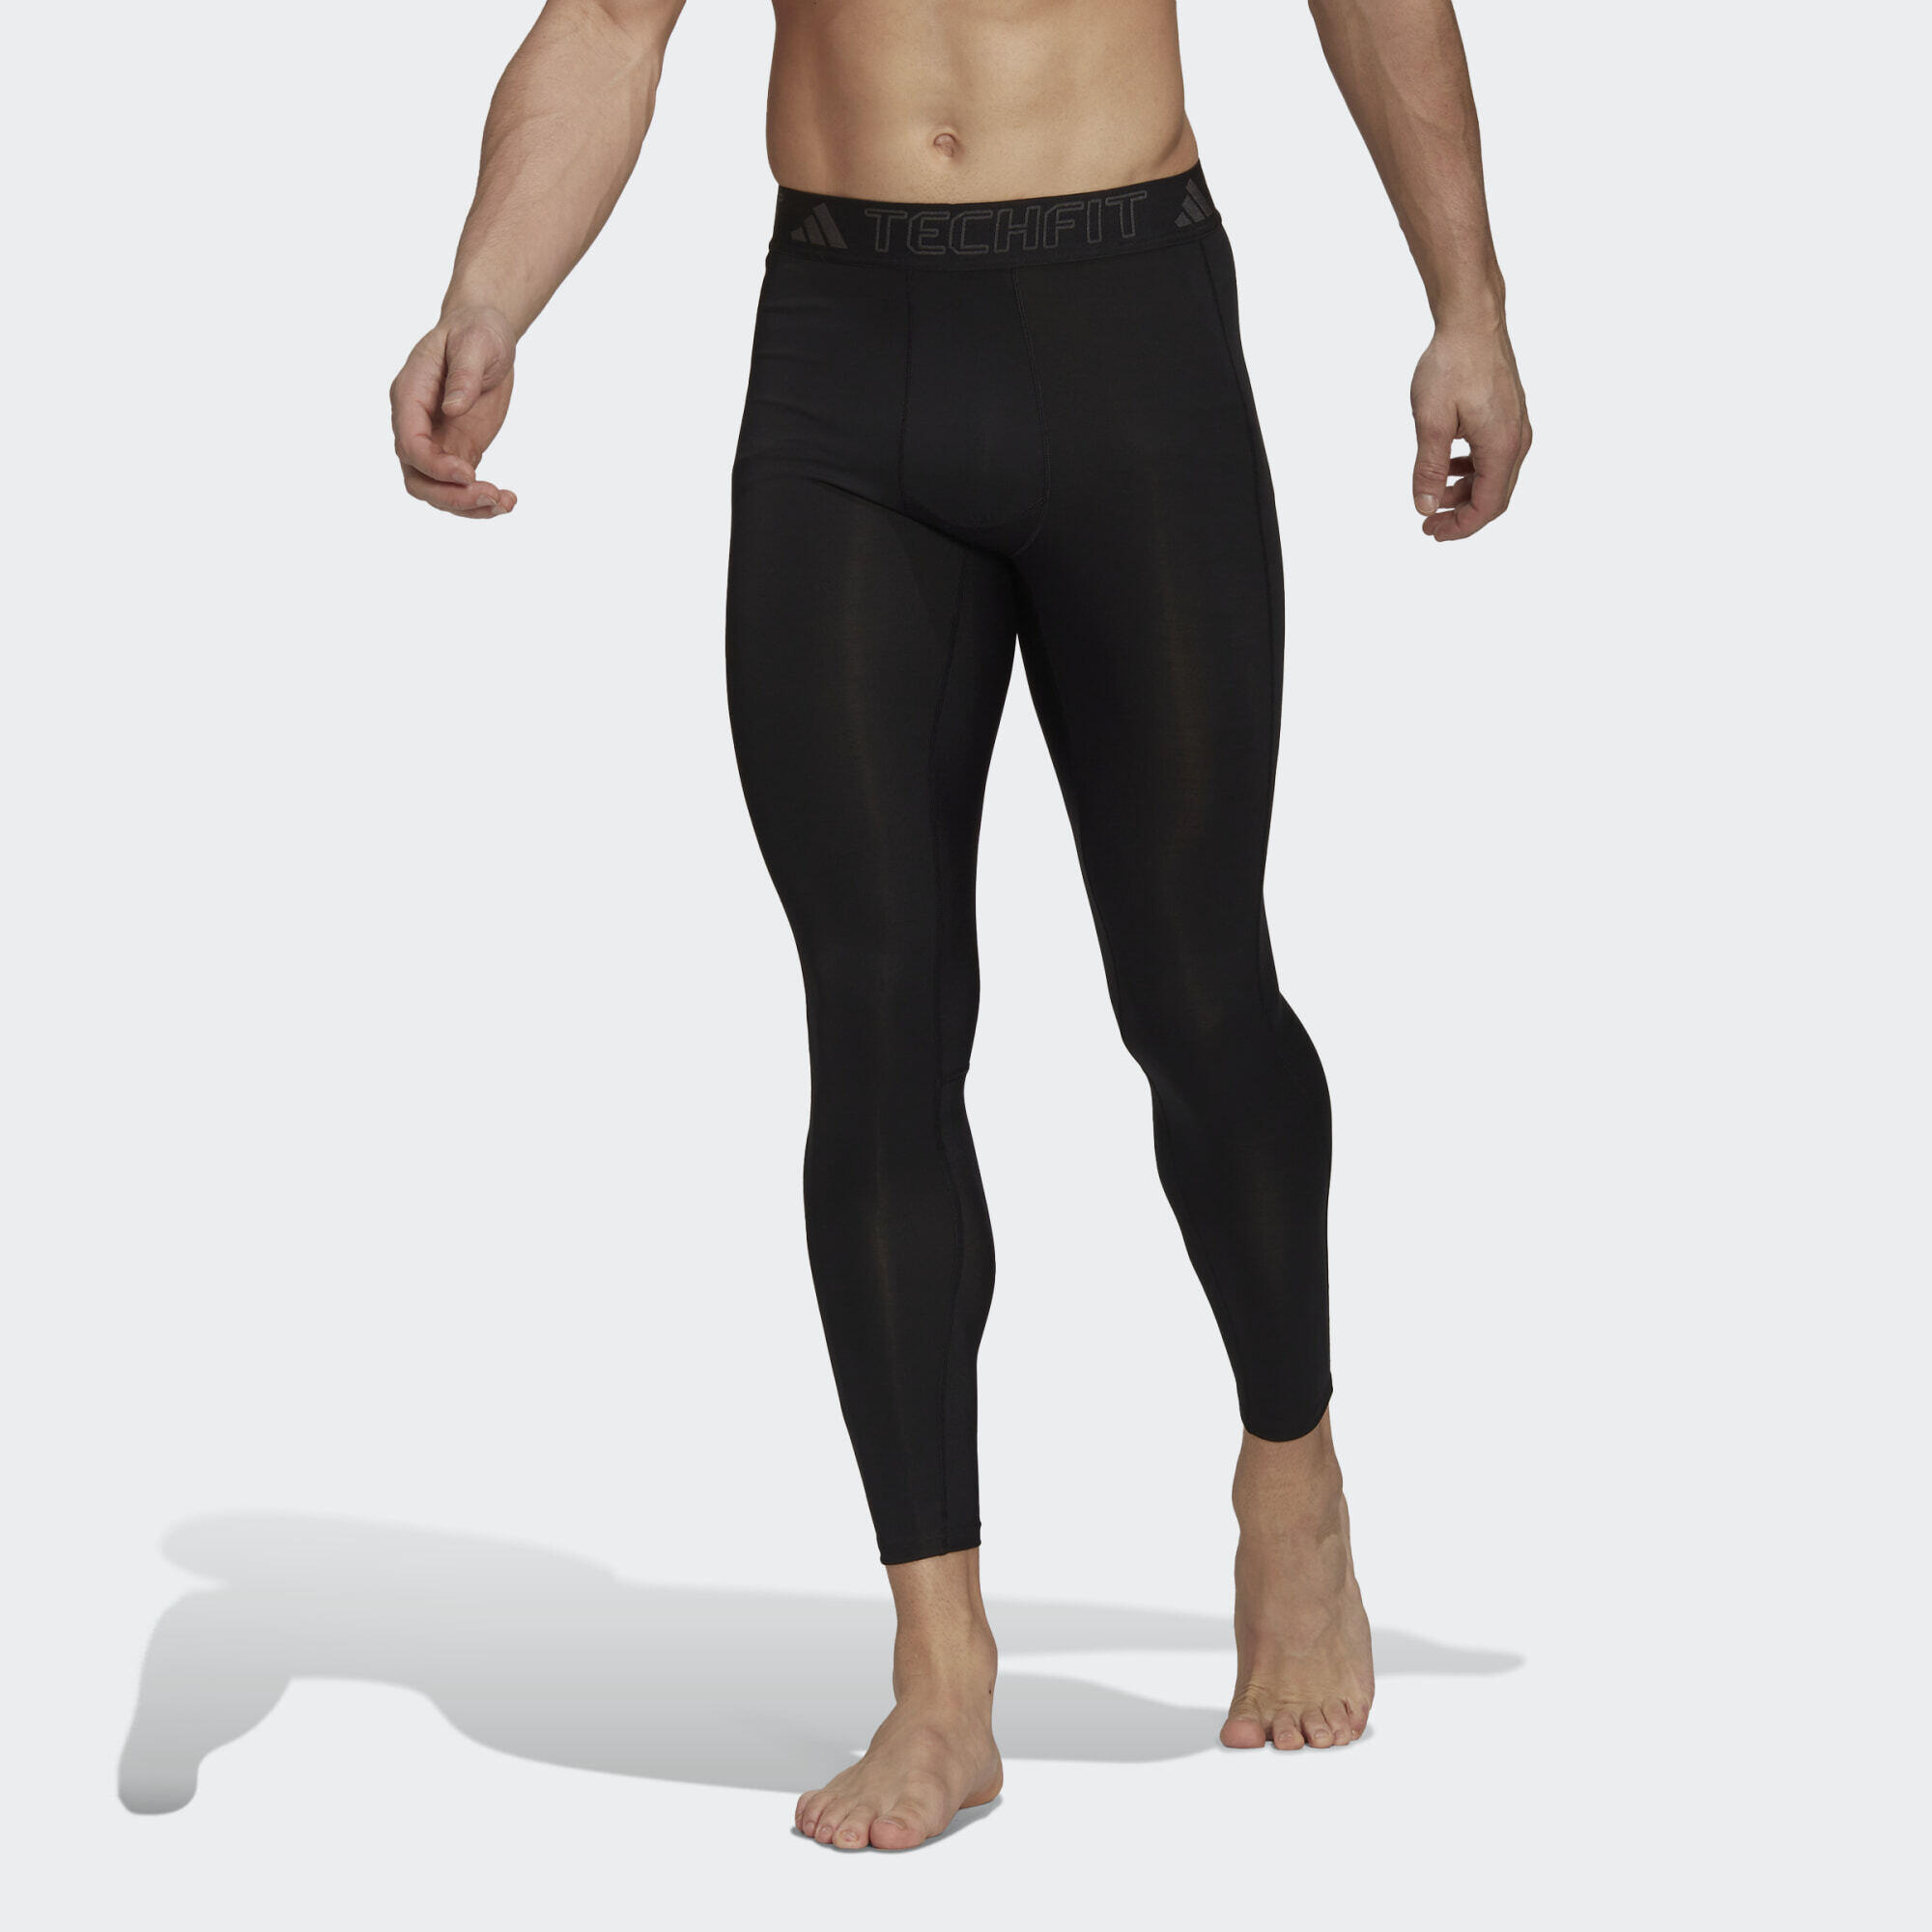 Compression Mens Running And Gym Decathlon Leggings For Training